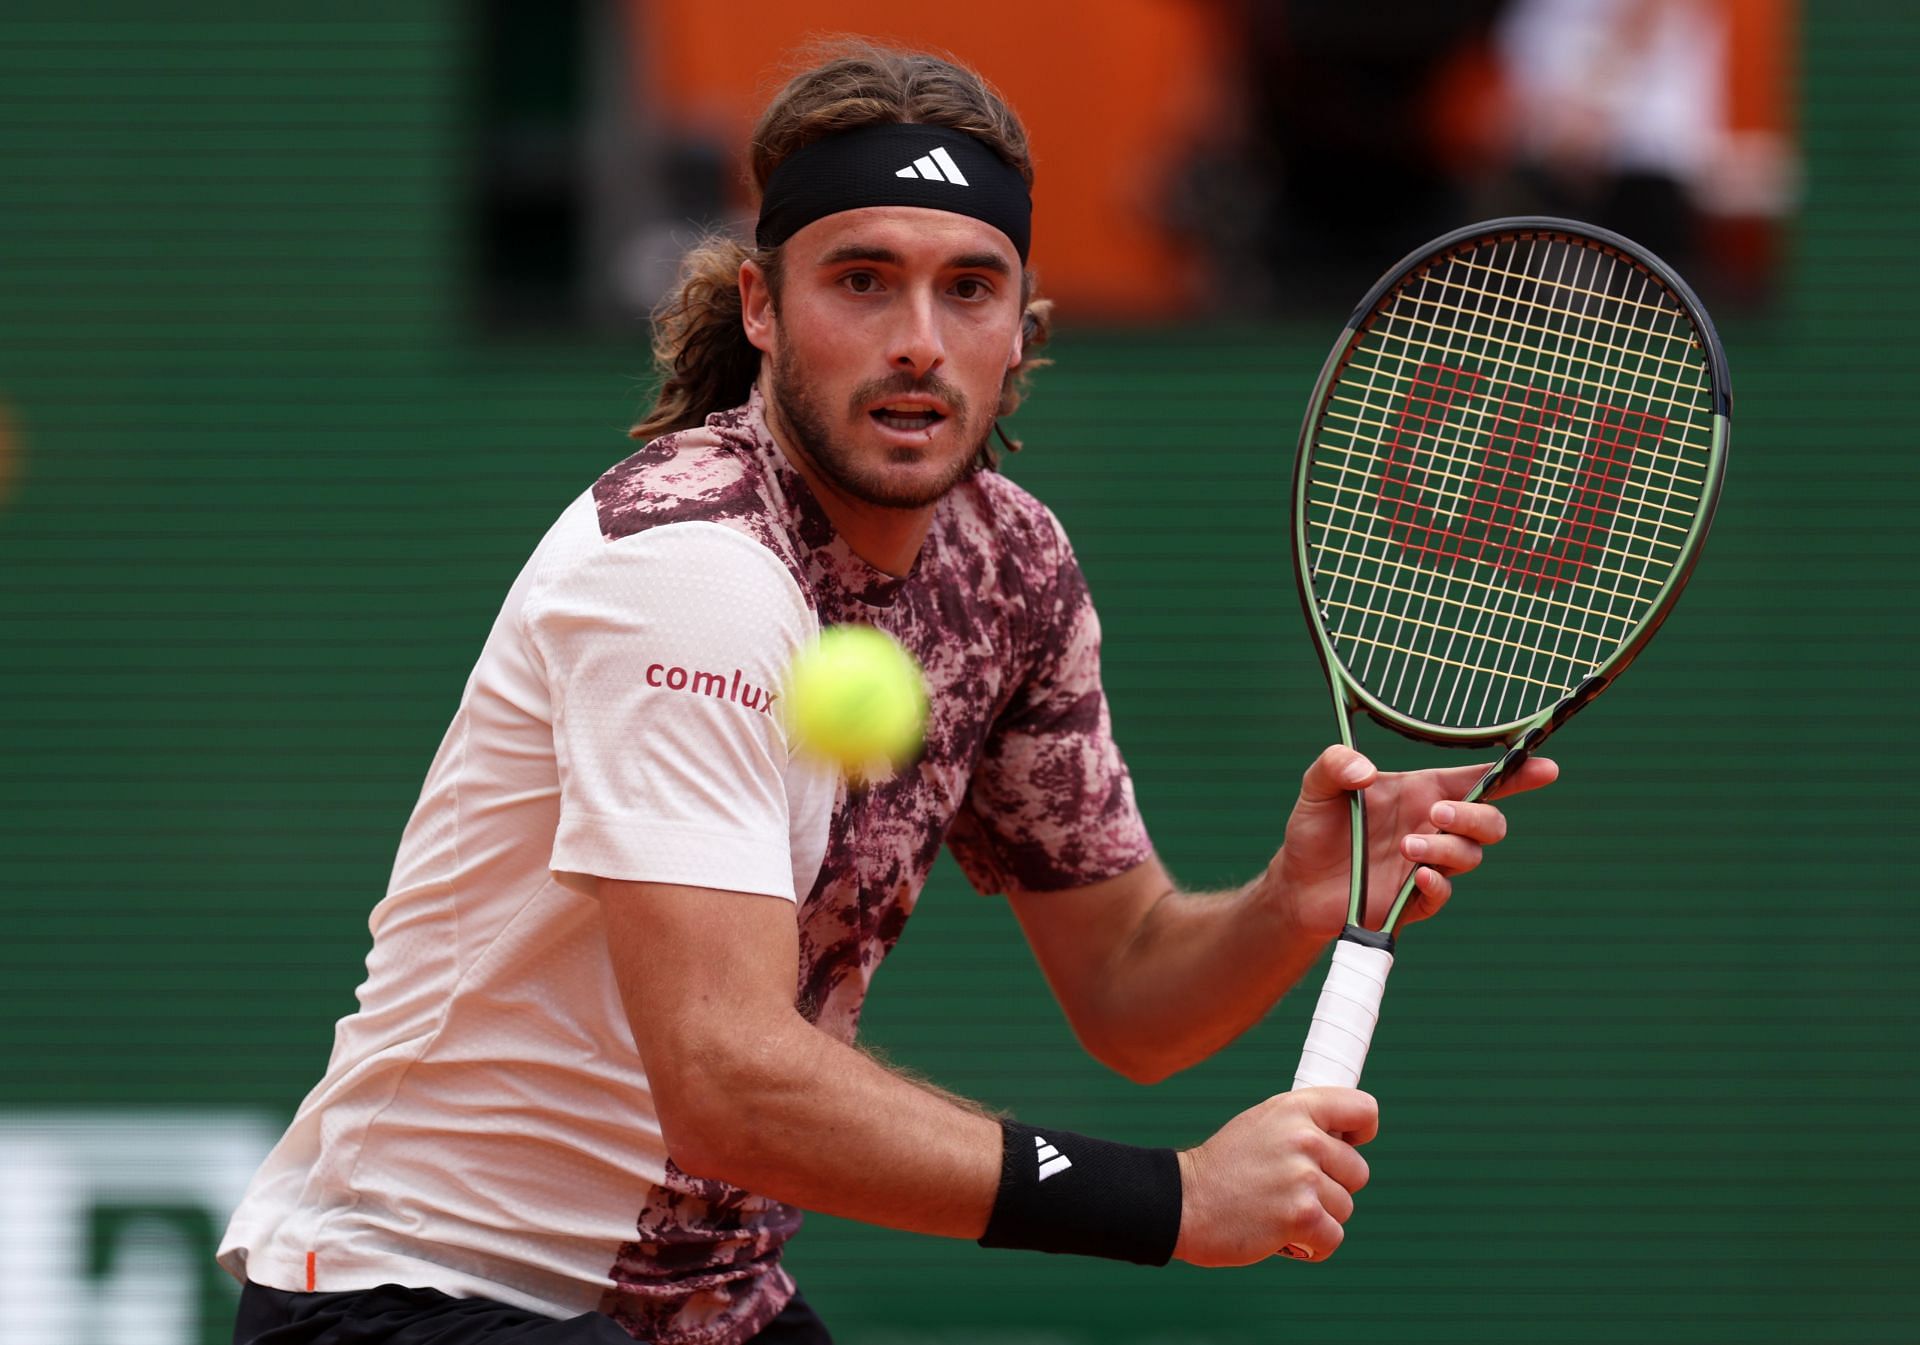 Monte-Carlo Masters 2023 Schedule Today TV schedule, start time, order of play, live stream details and more Day 6